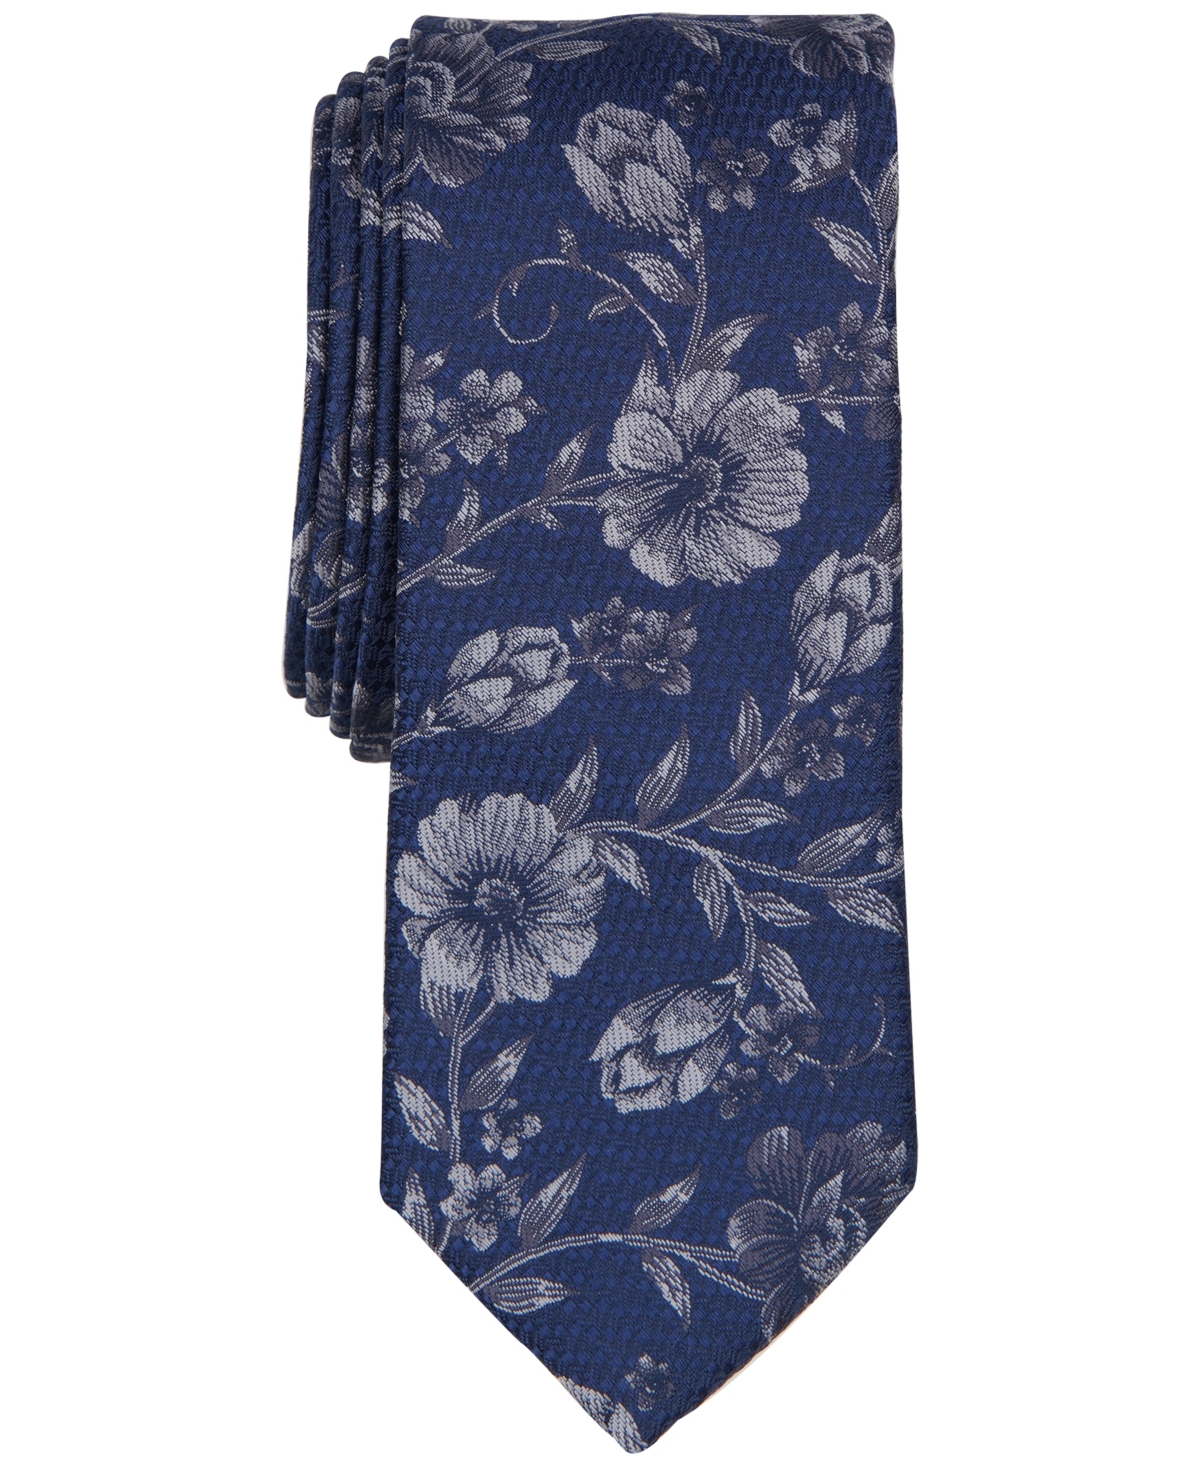 BAR III MEN'S WAVERLY FLORAL TIE, CREATED FOR MACY'S